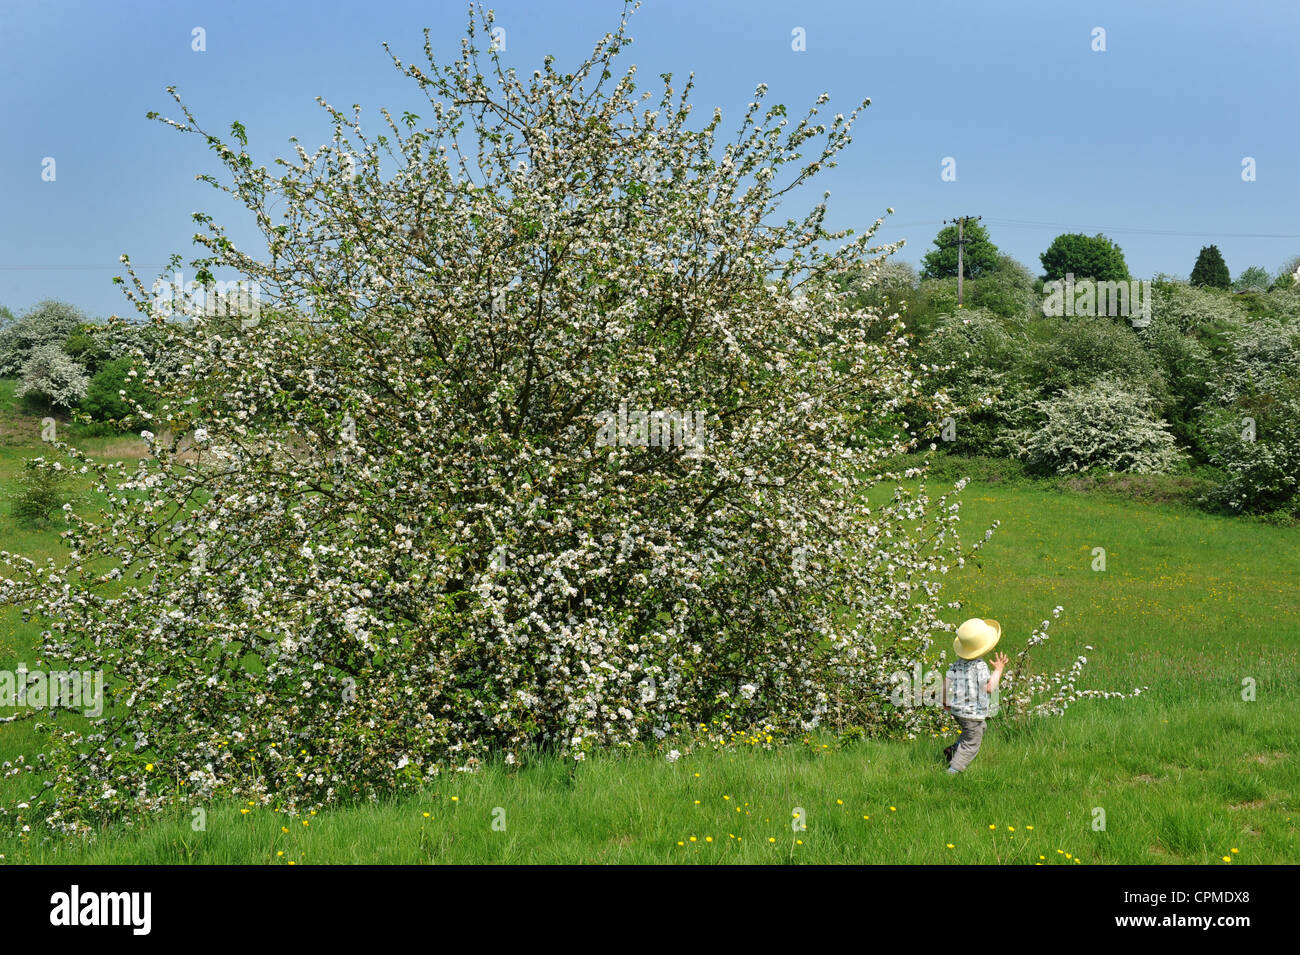 Child walking with spring blossom and crab apple tree England Uk Stock Photo